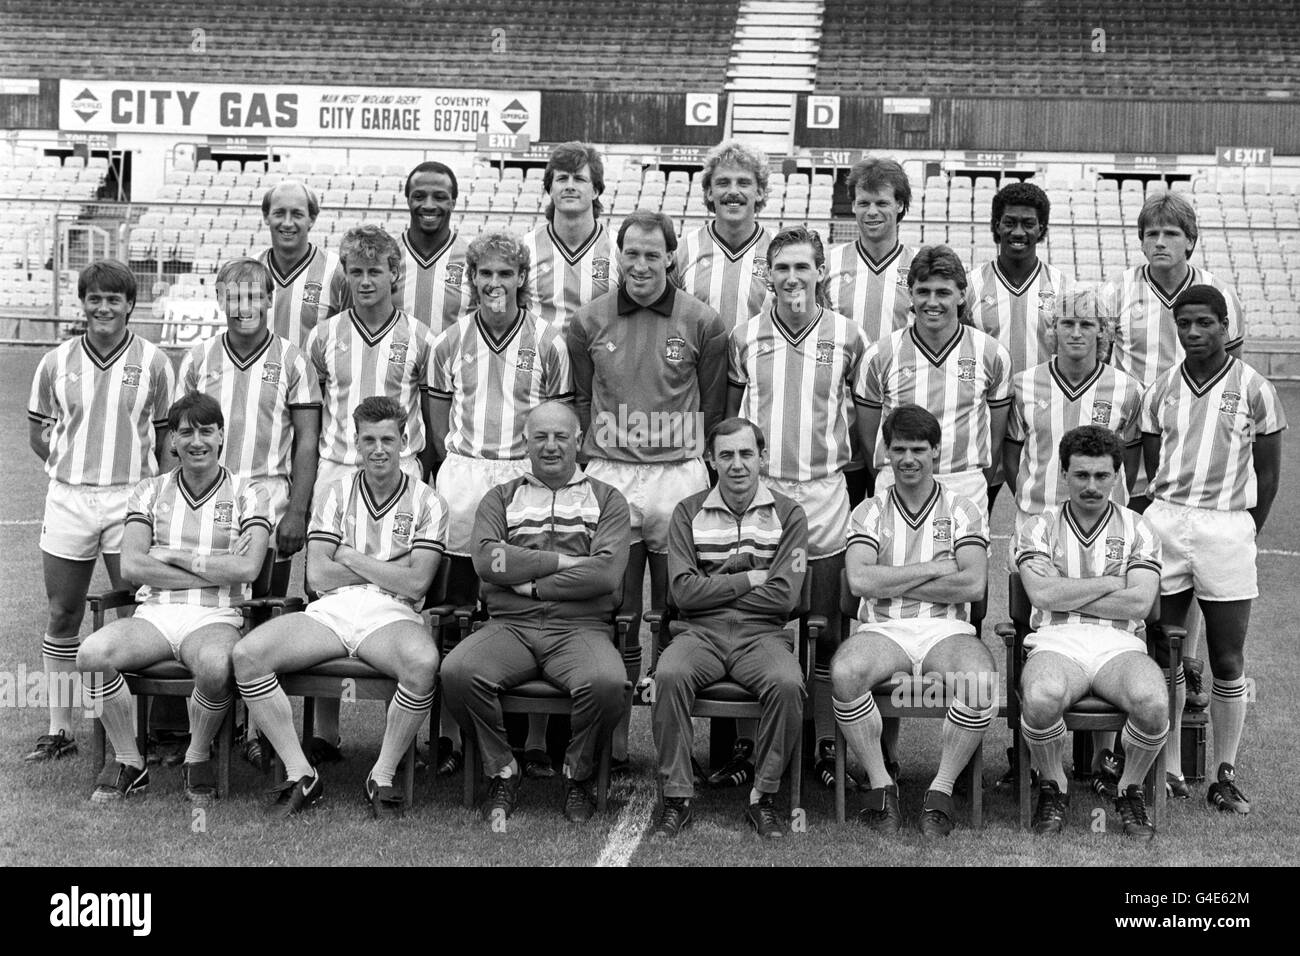 Coventry City squad for the 1986-87 Season. (back row l-r) Greg Downs, Cyrille Regis, Keith Houchen, Brian Kilcline, Trevor Peake, Dave Bennett and Dave Phillips. (middle l-r) Micky Adams, Wayne Turner, Stephen Sedgley, Andy Williams, Steve Ogrizovic, Graham Rodger, Nick Pickering, Gareth Evans and Lloyd McGrath. (front l-r) Paul Culpin, Brian Borrows, John Sillett (chief coach), George Dalton (physiotherapist), Ian Painter and Michael Gynn. Stock Photo